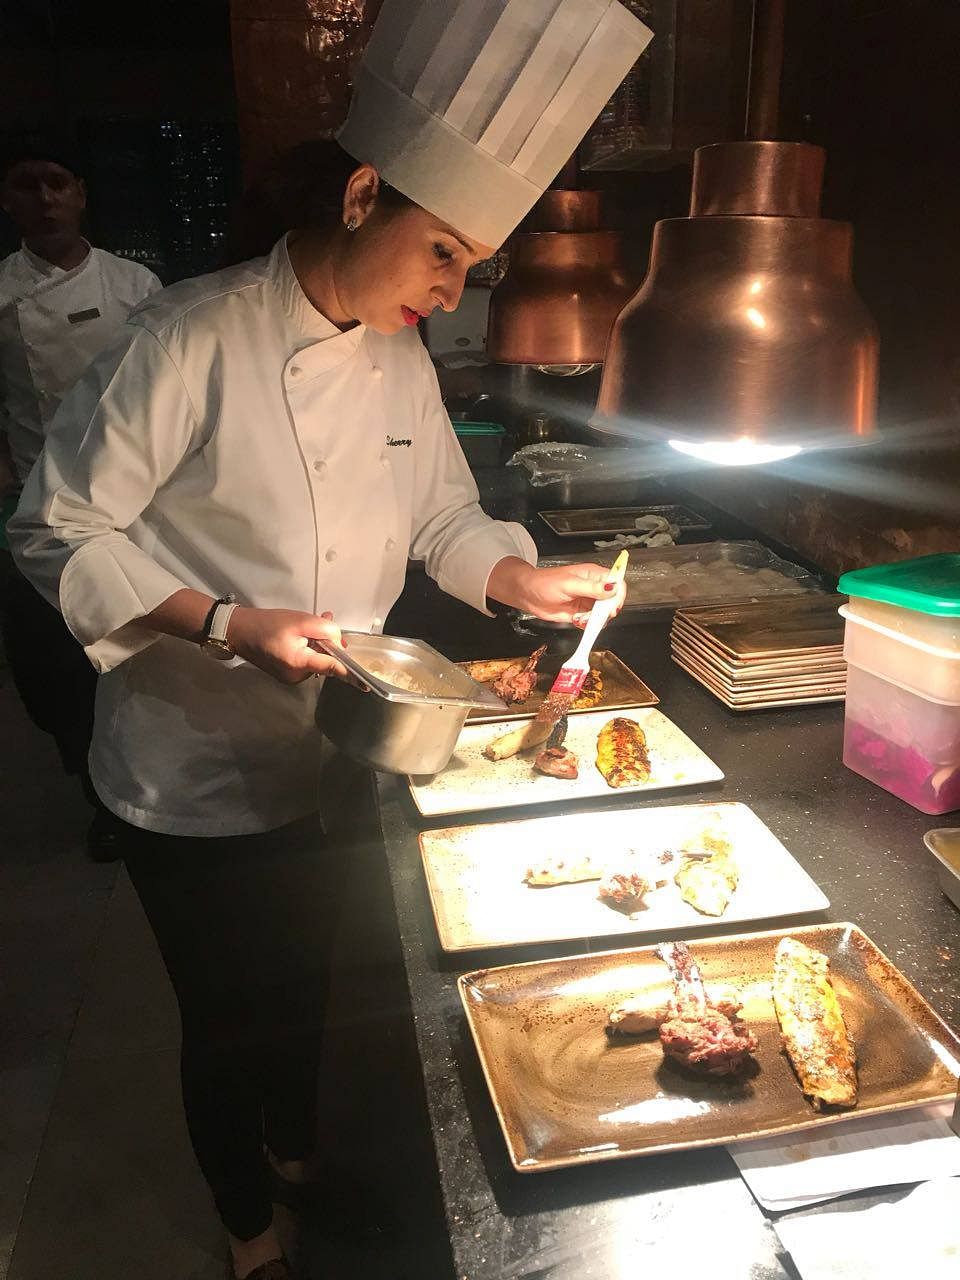 Sherry Malhotra, another home chef based out of Kolkata, points out that for the first time, hotels are promoting food beyond the commercial favourites, thanks to home chefs. 